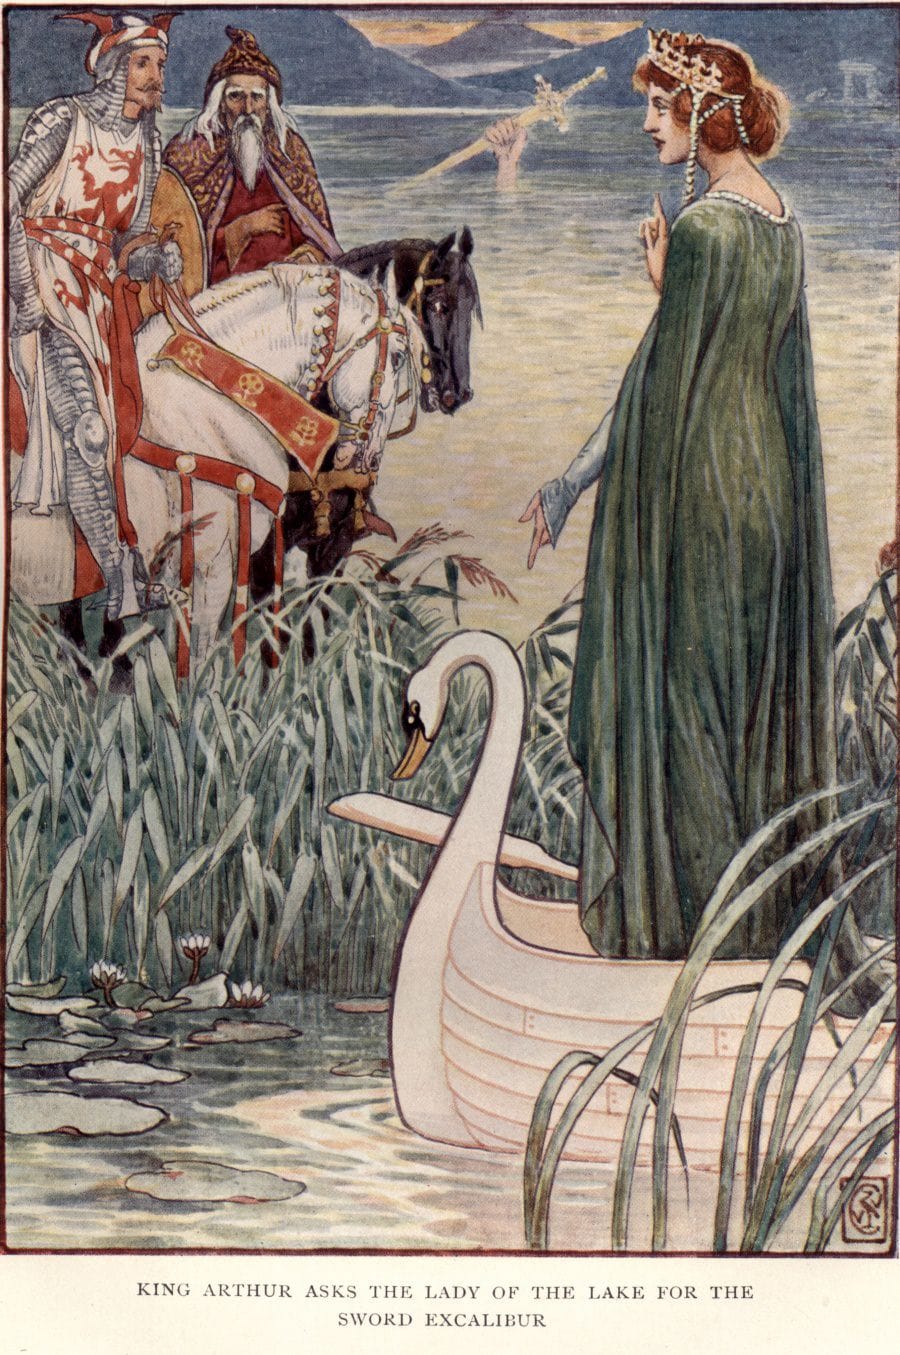 The Coming of Arthur from Idylls of the King by Lord Alfred Tennyson